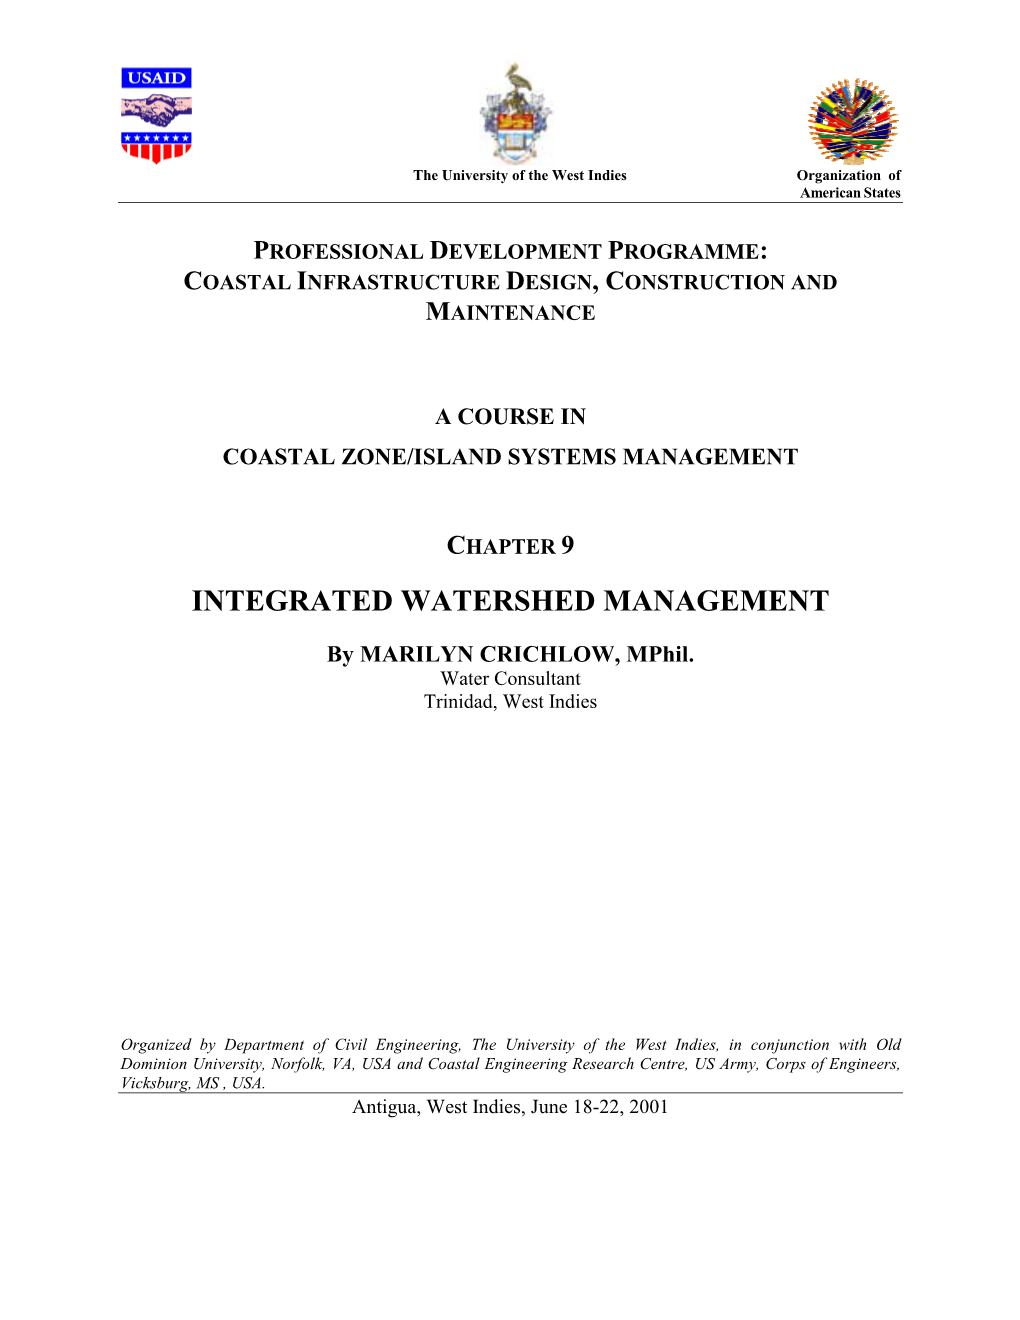 Chapter 9 Integrated Watershed Management